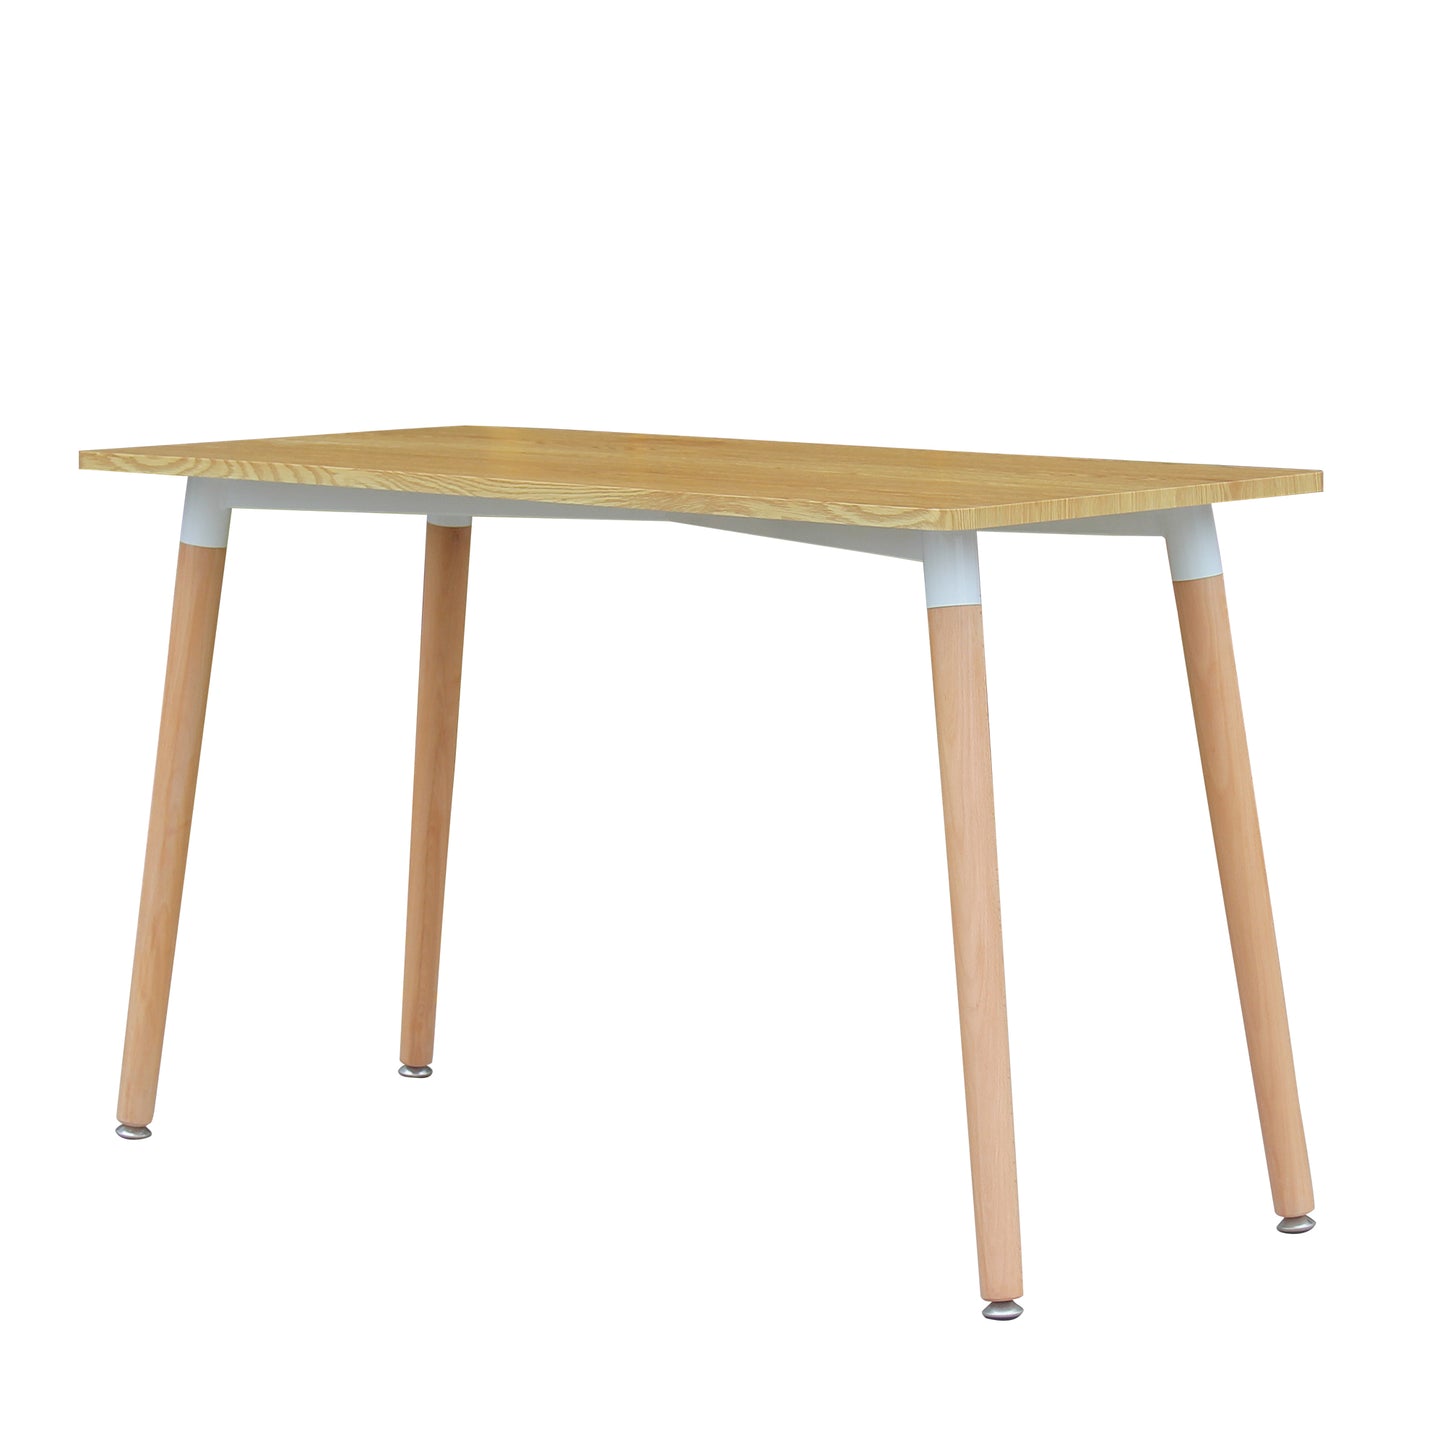 CHOTTO - Hako Rectangle Top Dining Table with Wooden Legs - Wood - 120cm